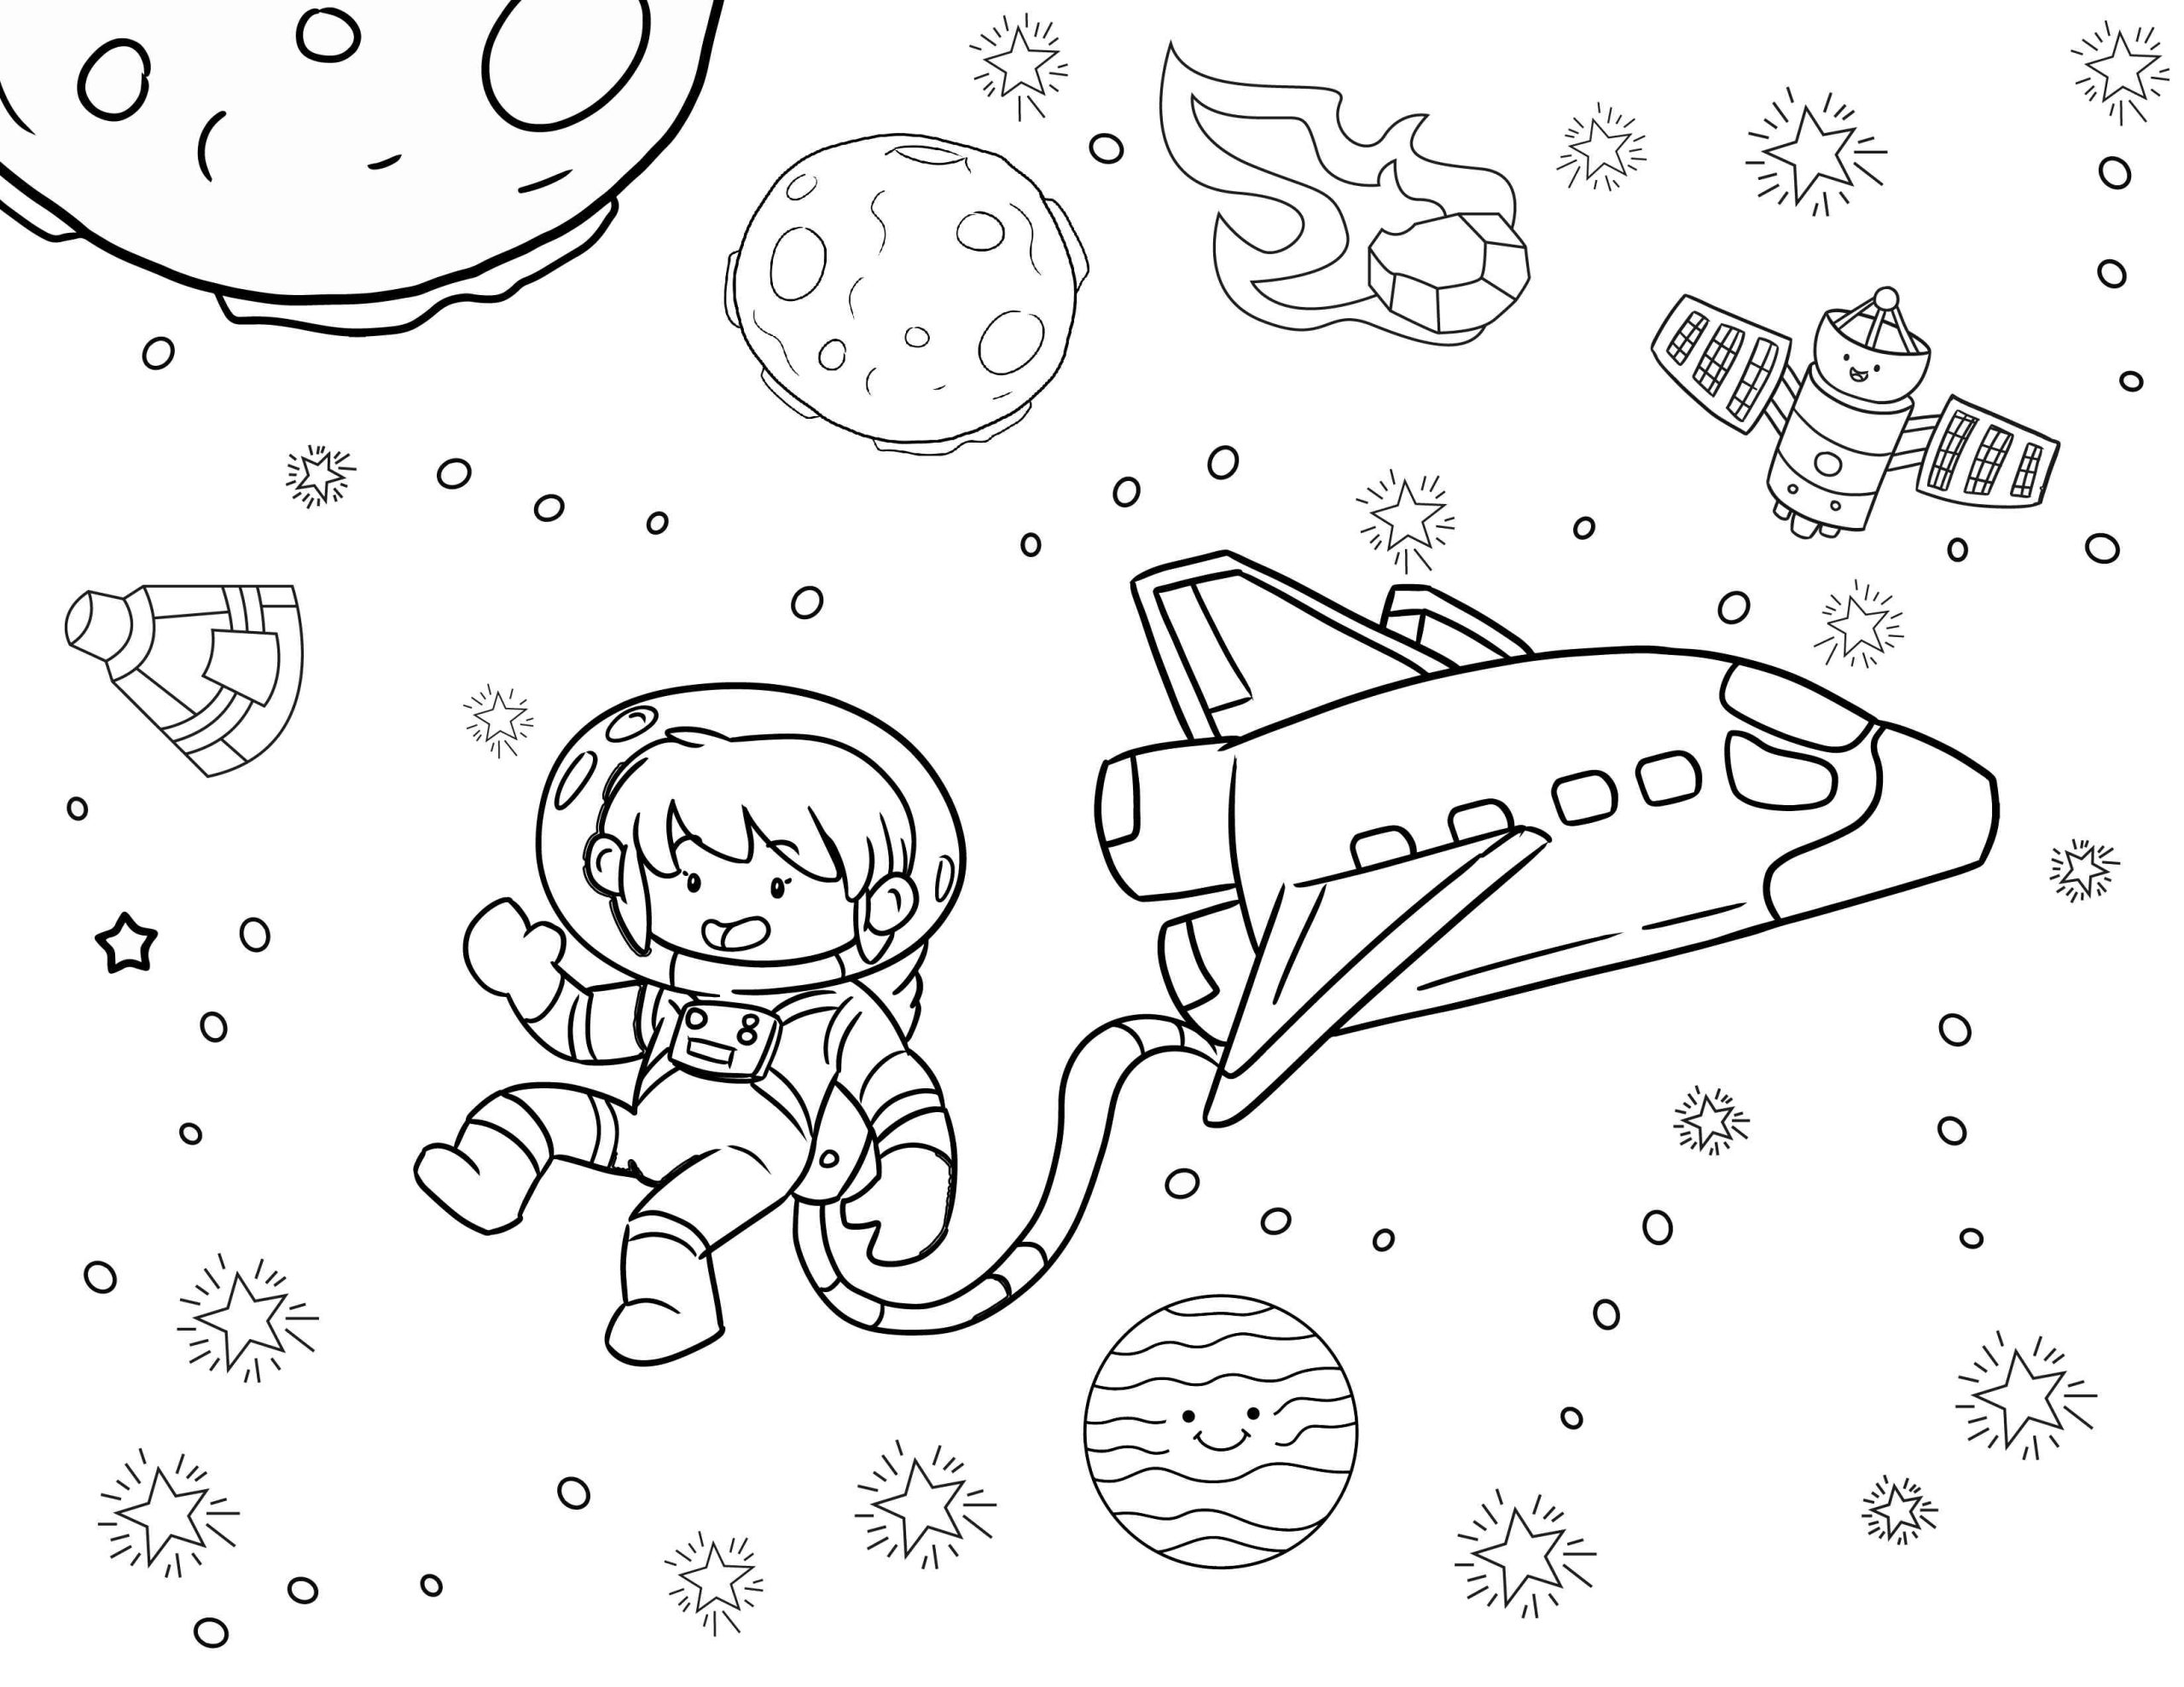 Rocketship Space Galaxy Planet Outerspace Coloring Pages - Astronaut Coloring  Pages - Coloring Pages For Kids And Adults